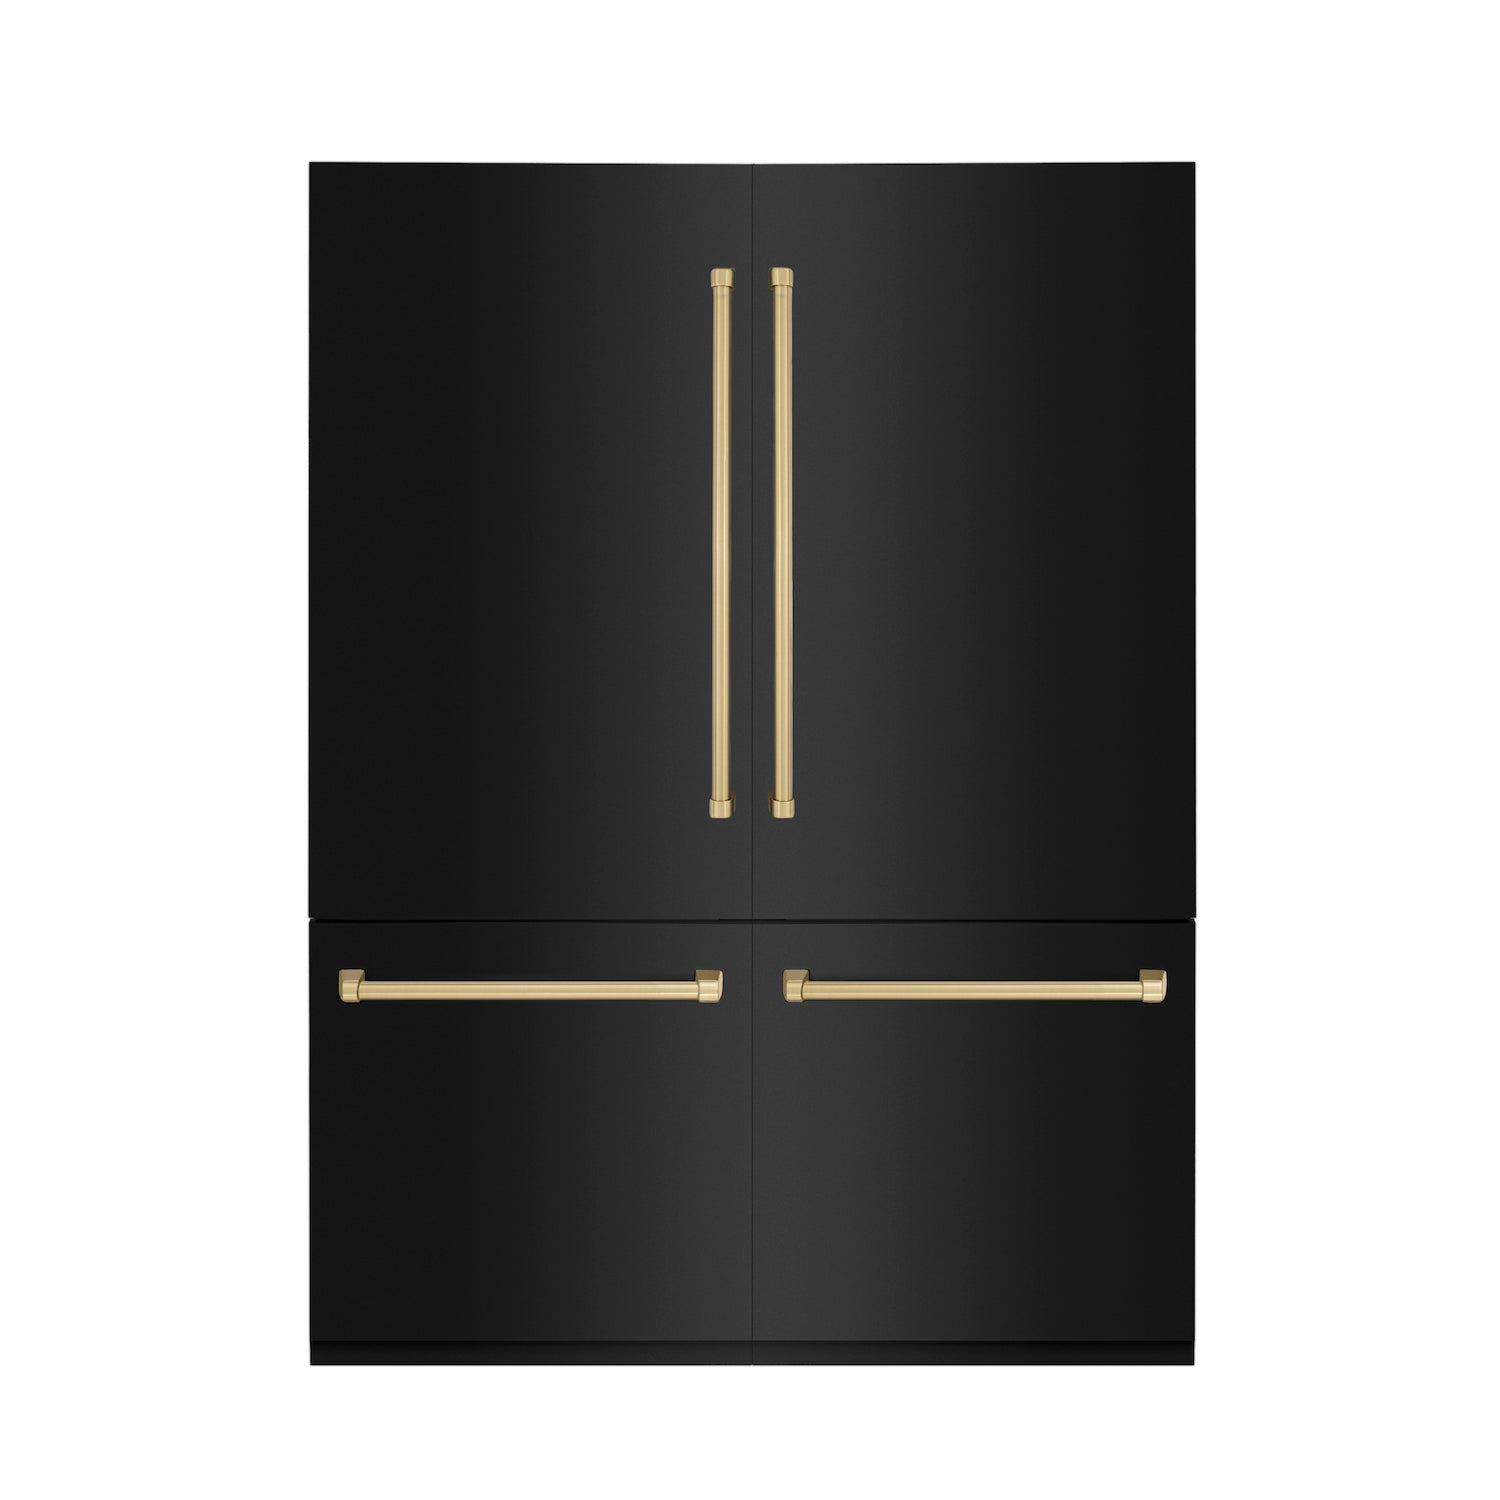 ZLINE 60" Autograph Edition Built-in French Door Refrigerator in Black Stainless Steel with Accent Handles front.